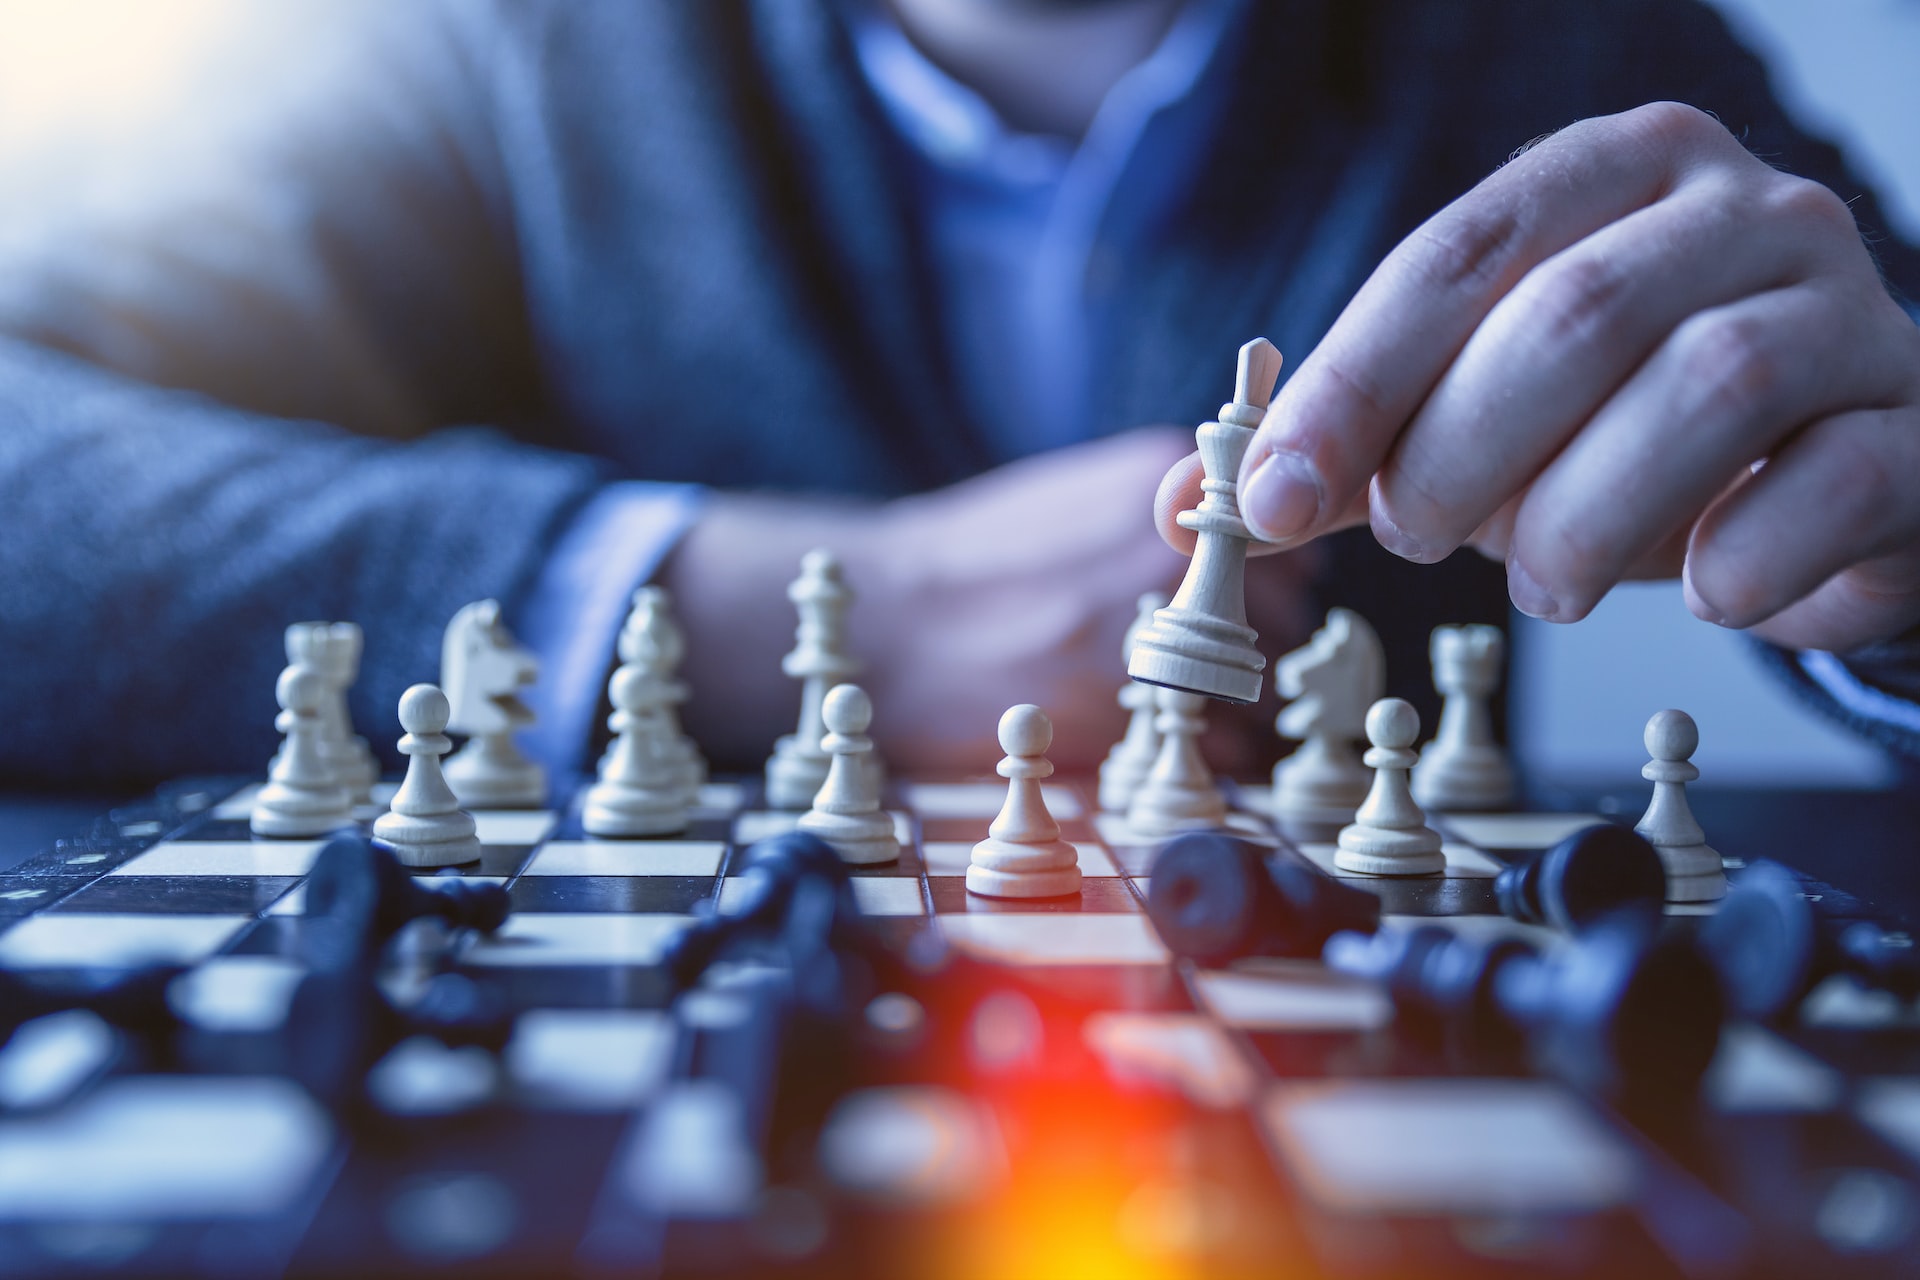 Developing a business strategy is a lot like chess